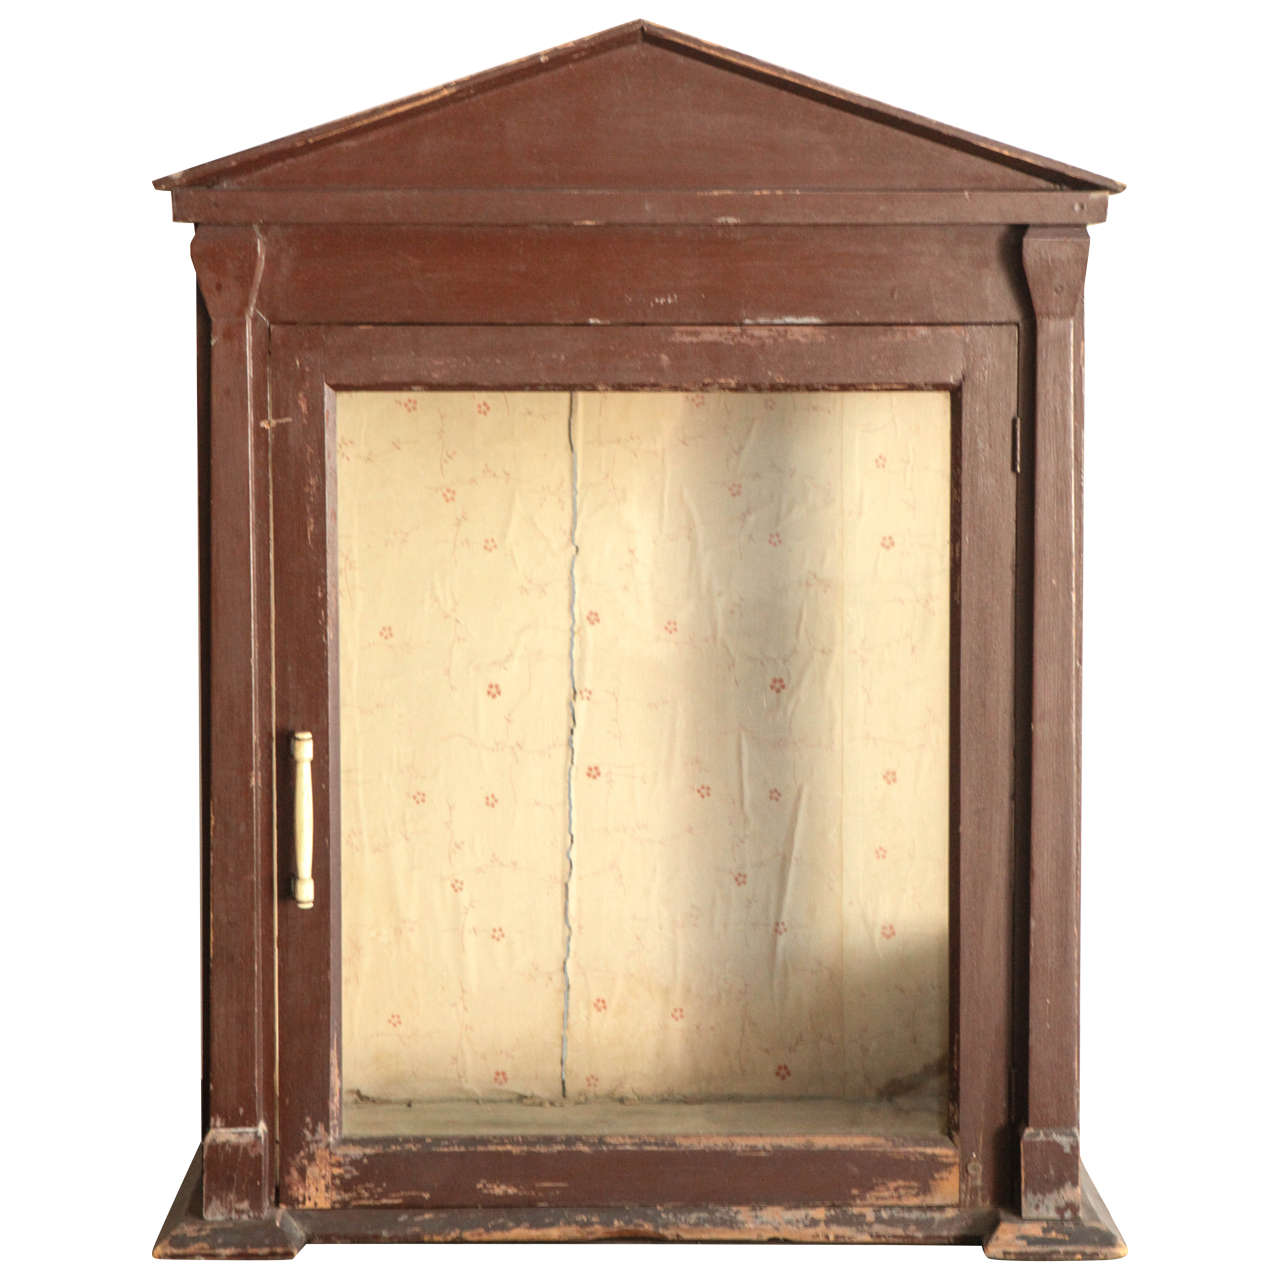 Early American Display Case